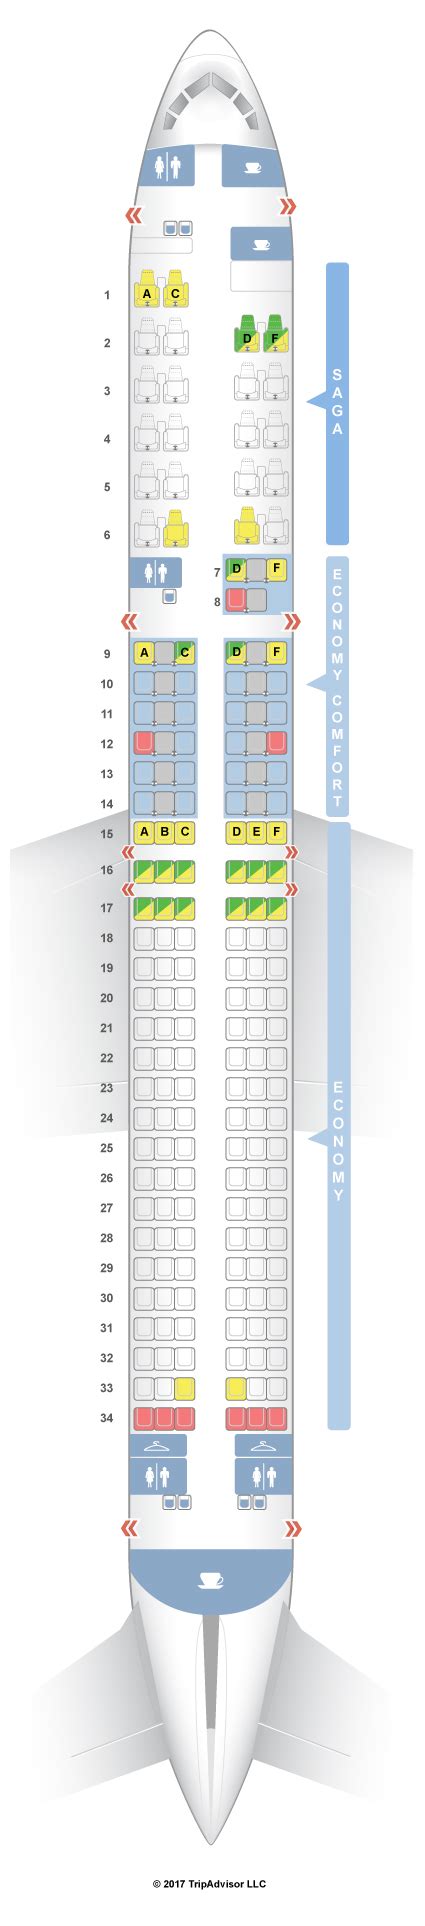 For your next Icelandair flight, use this seating chart to get th